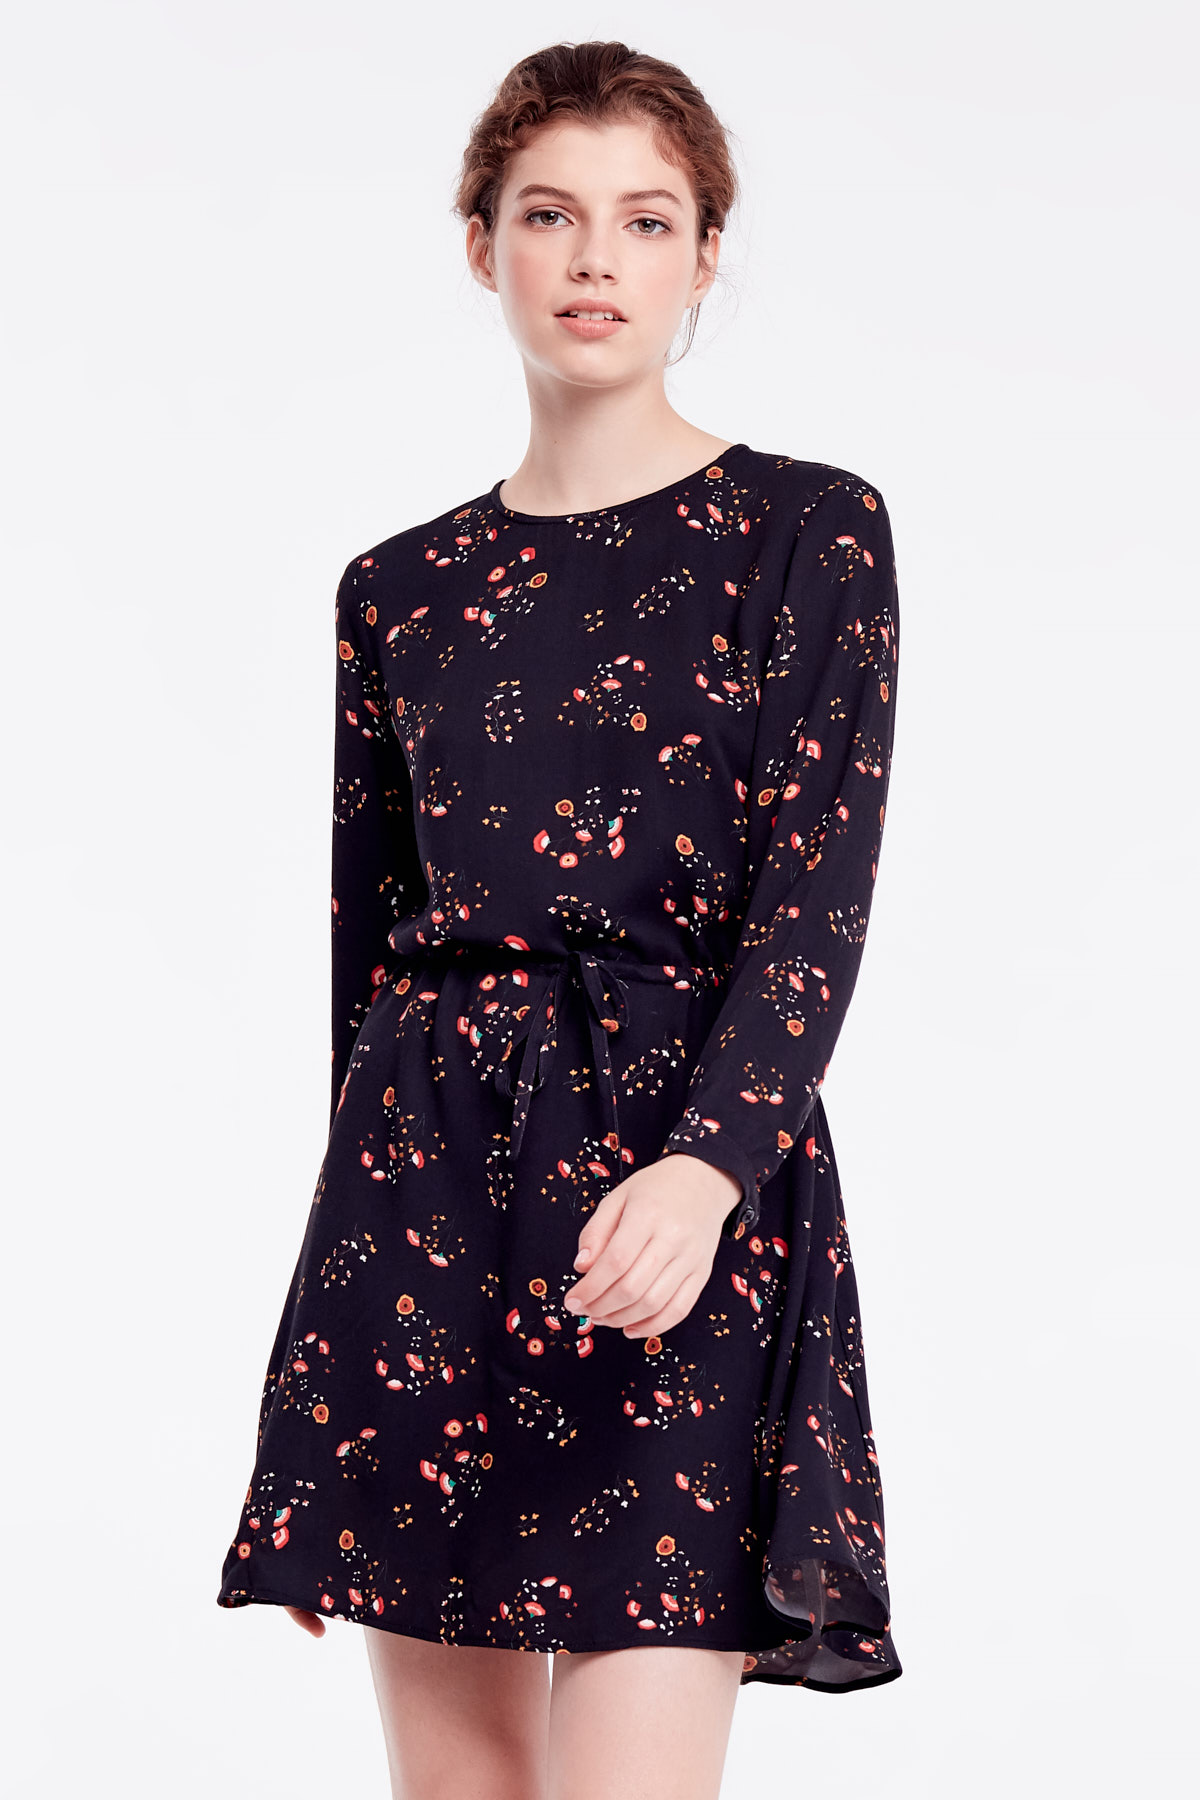 Black floral dress with straps on waist, photo 1